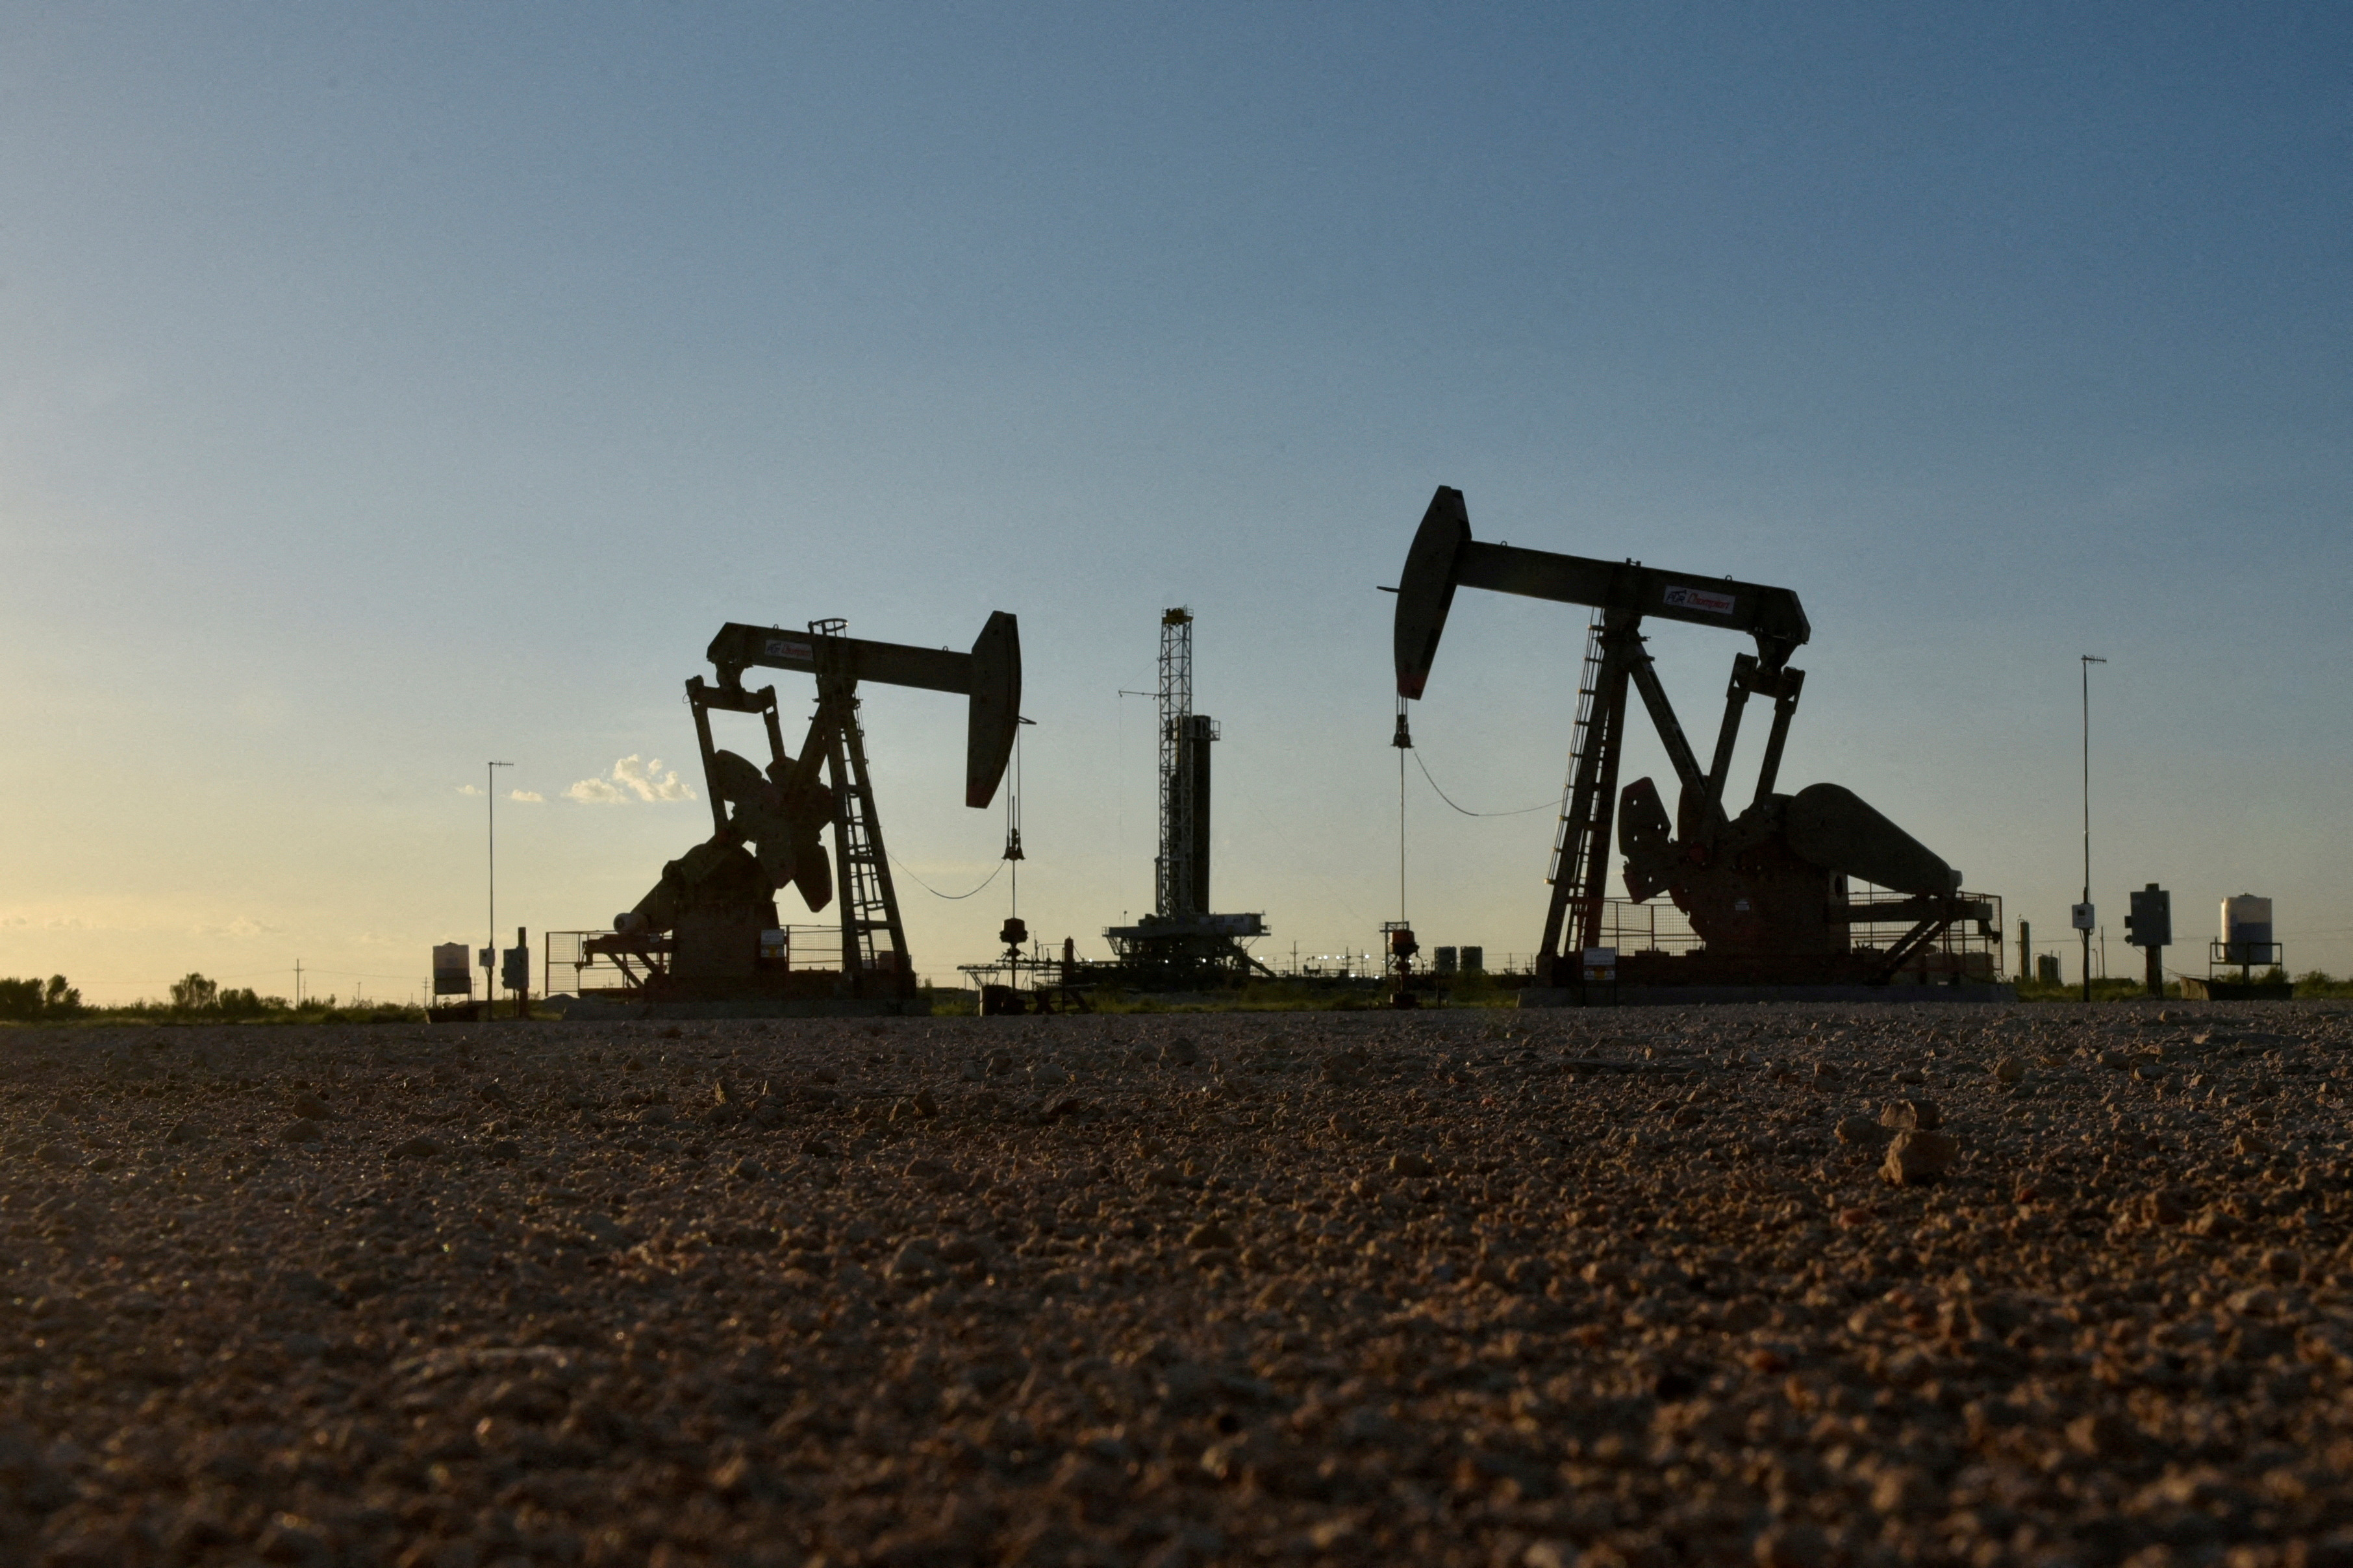 Pump jacks operate in front of a drilling rig in an oil field in Midland, Texas, U.S.